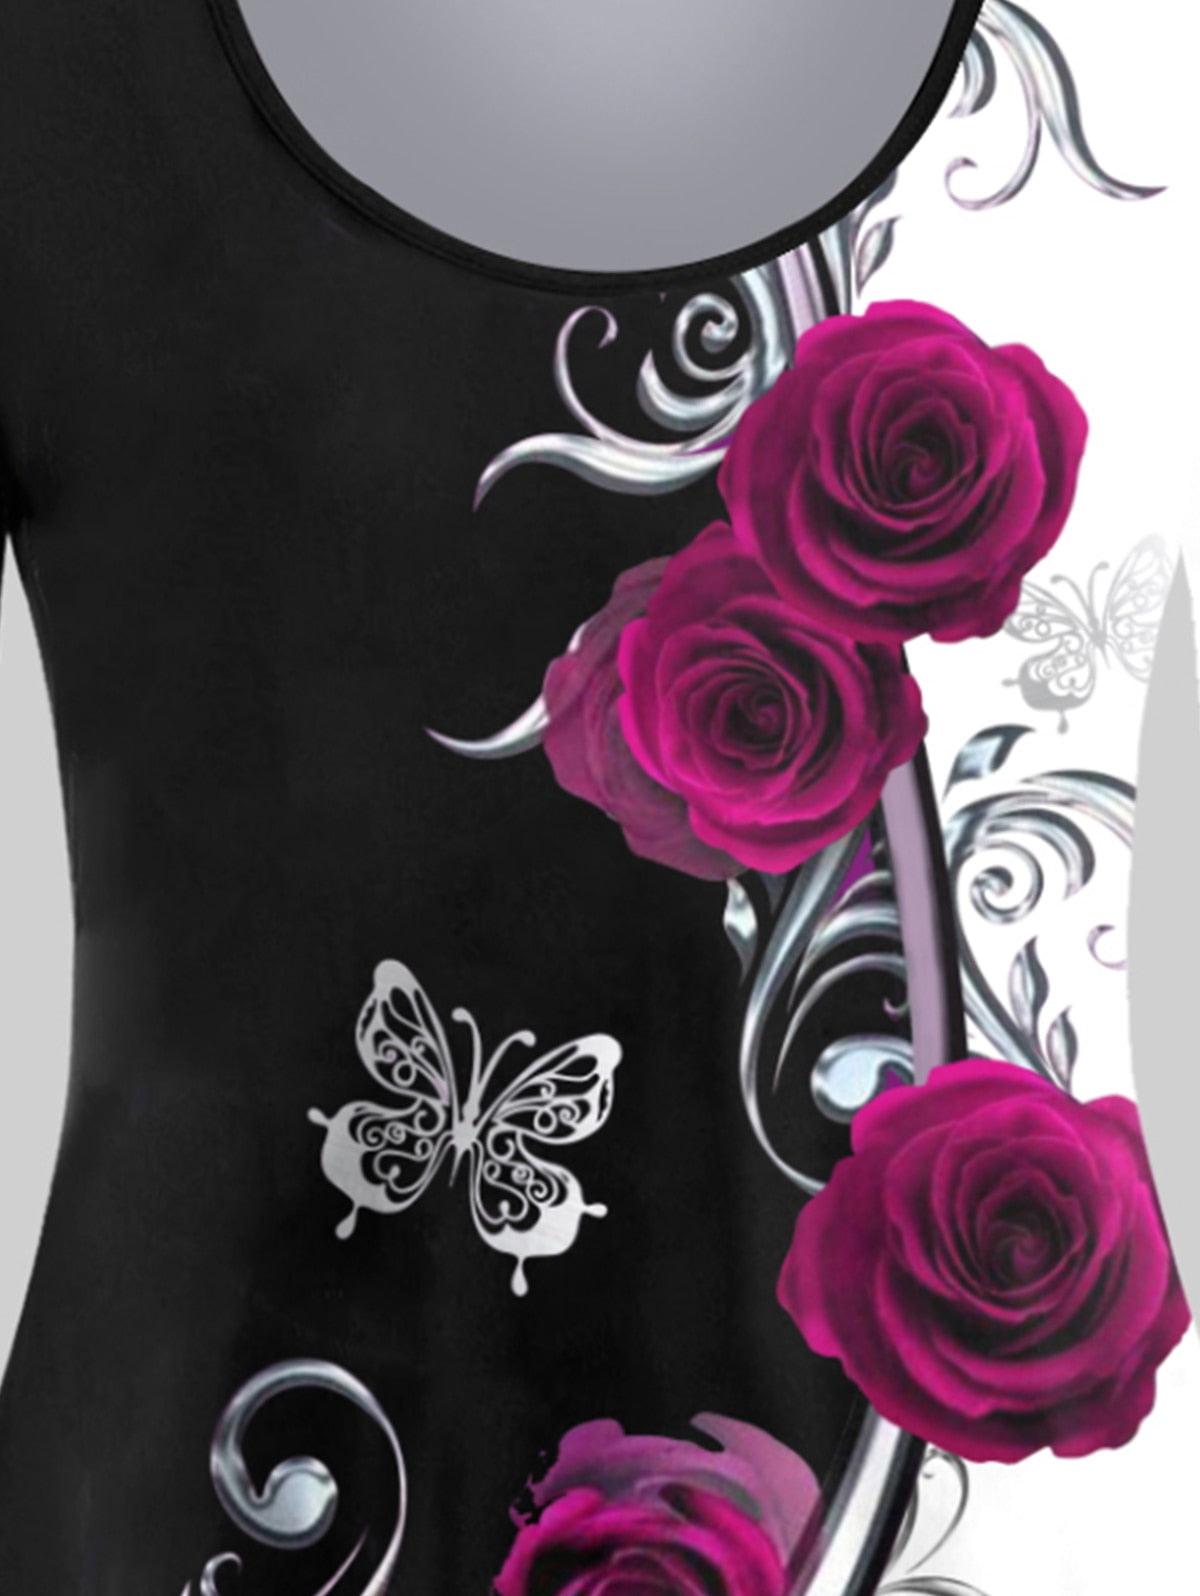 Rose Printed Top Plus Size for Women